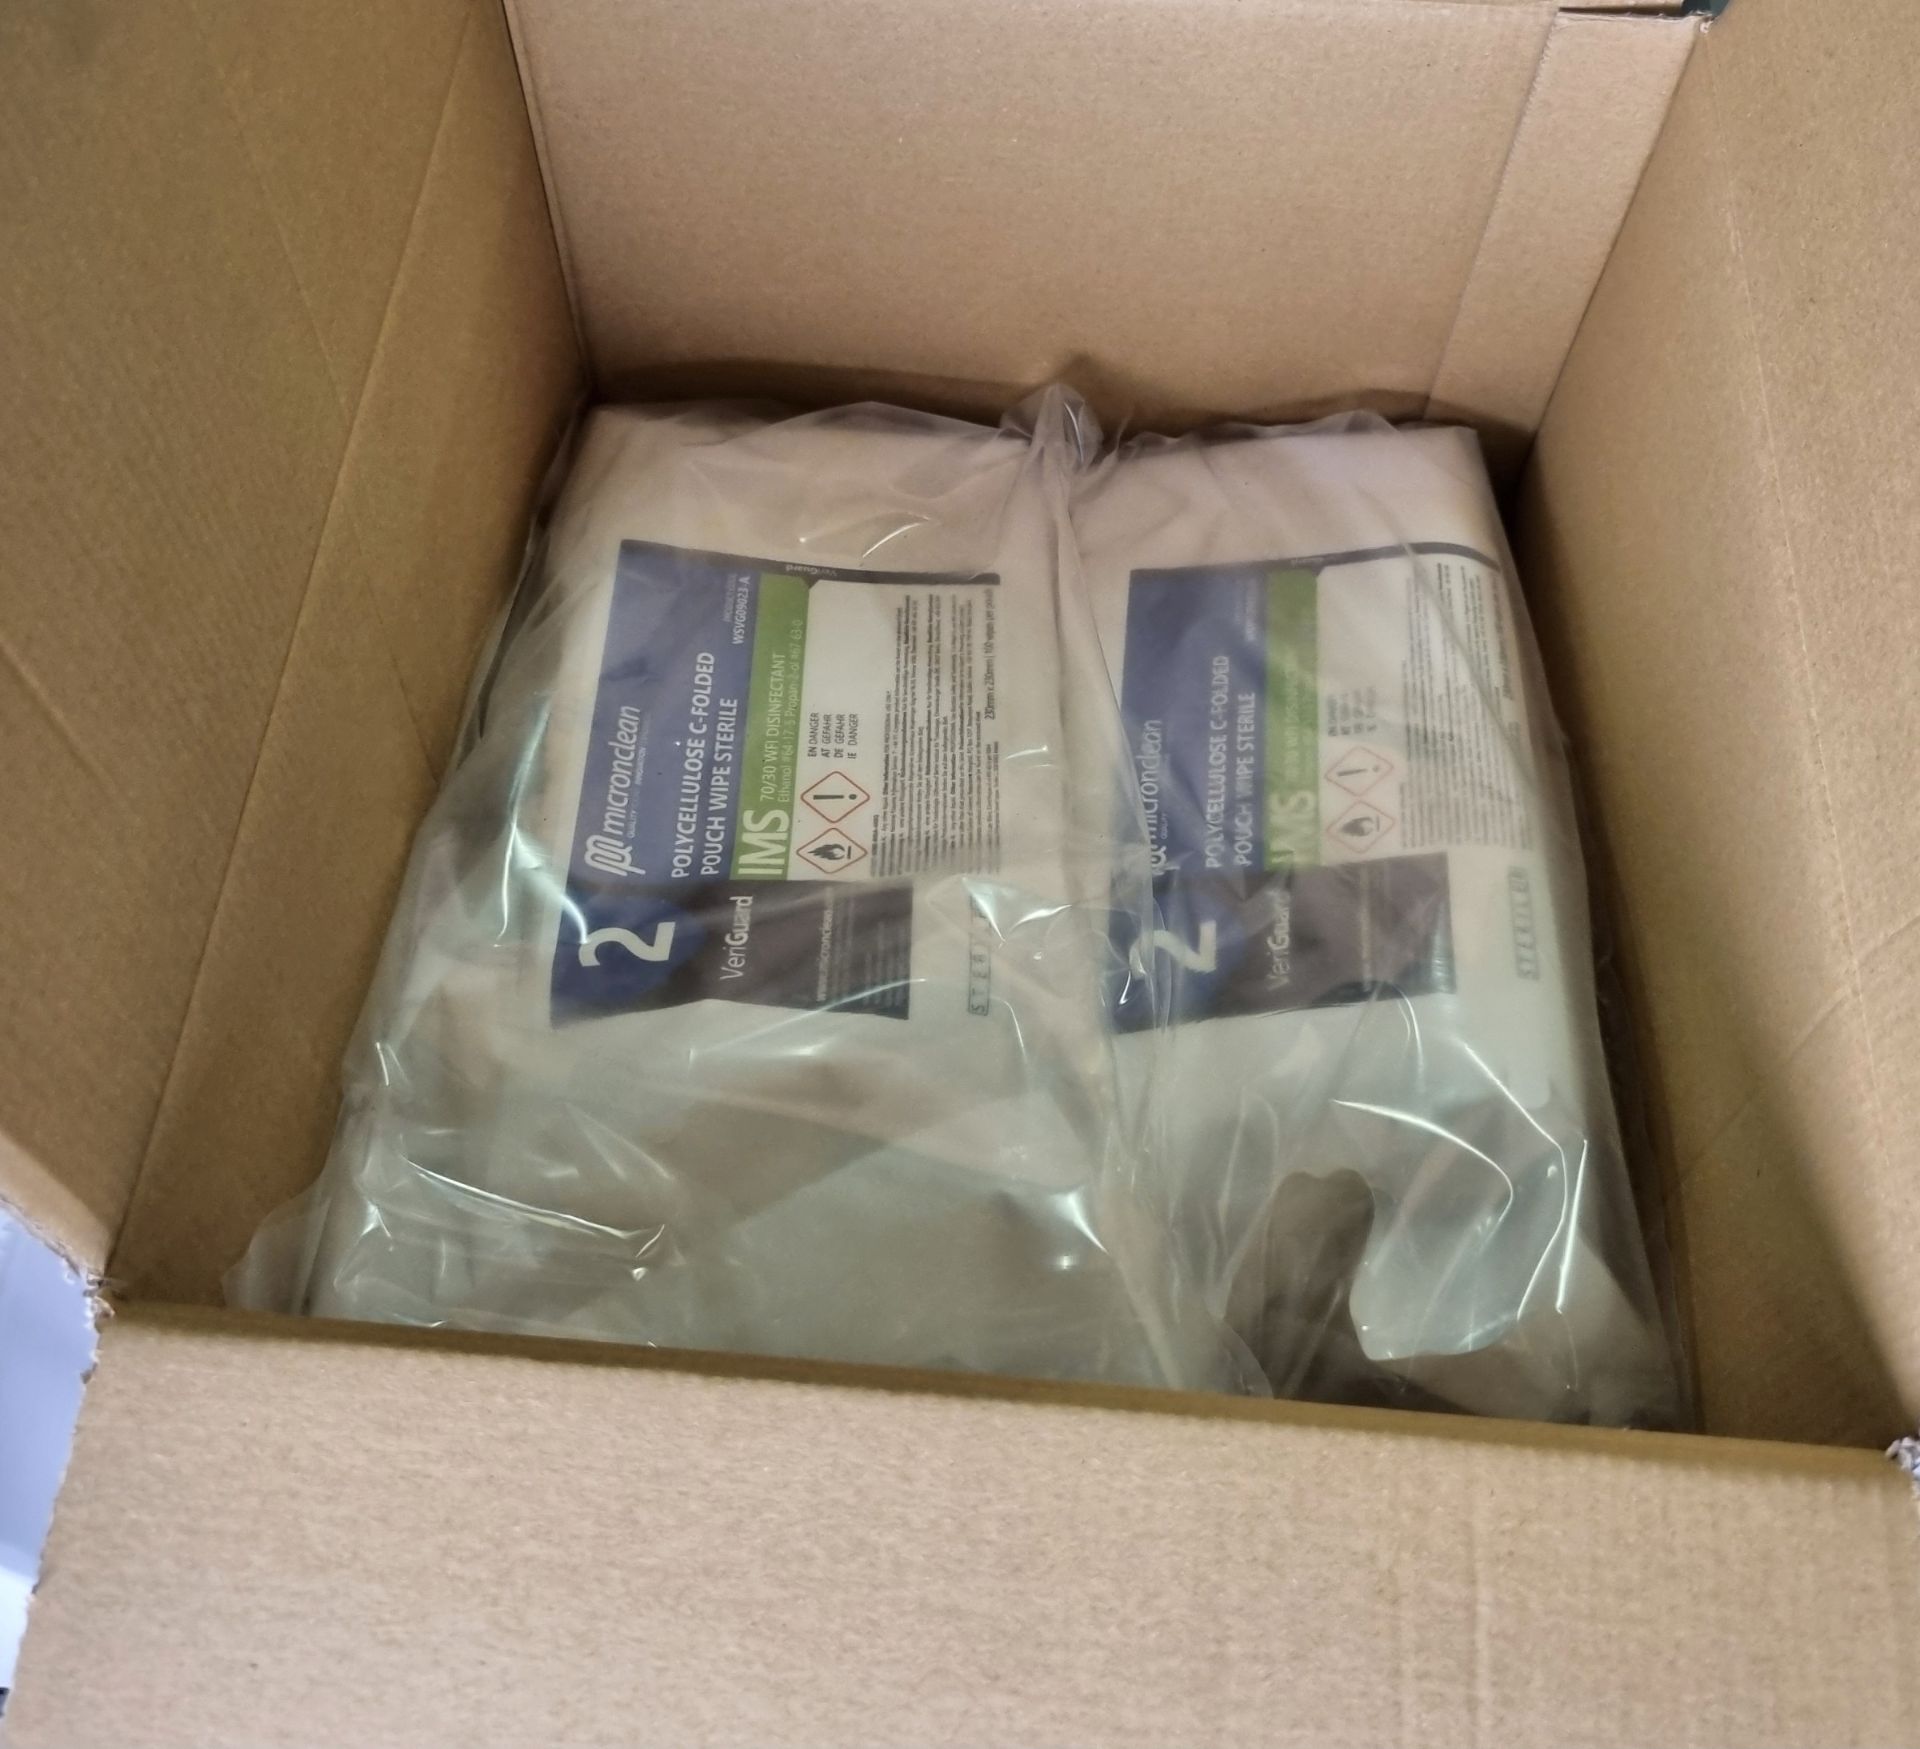 36x boxes of Micronclean Veriguard Polycellulose C-folded pouch wipe sterile - 230mm x 230mm - Image 2 of 4